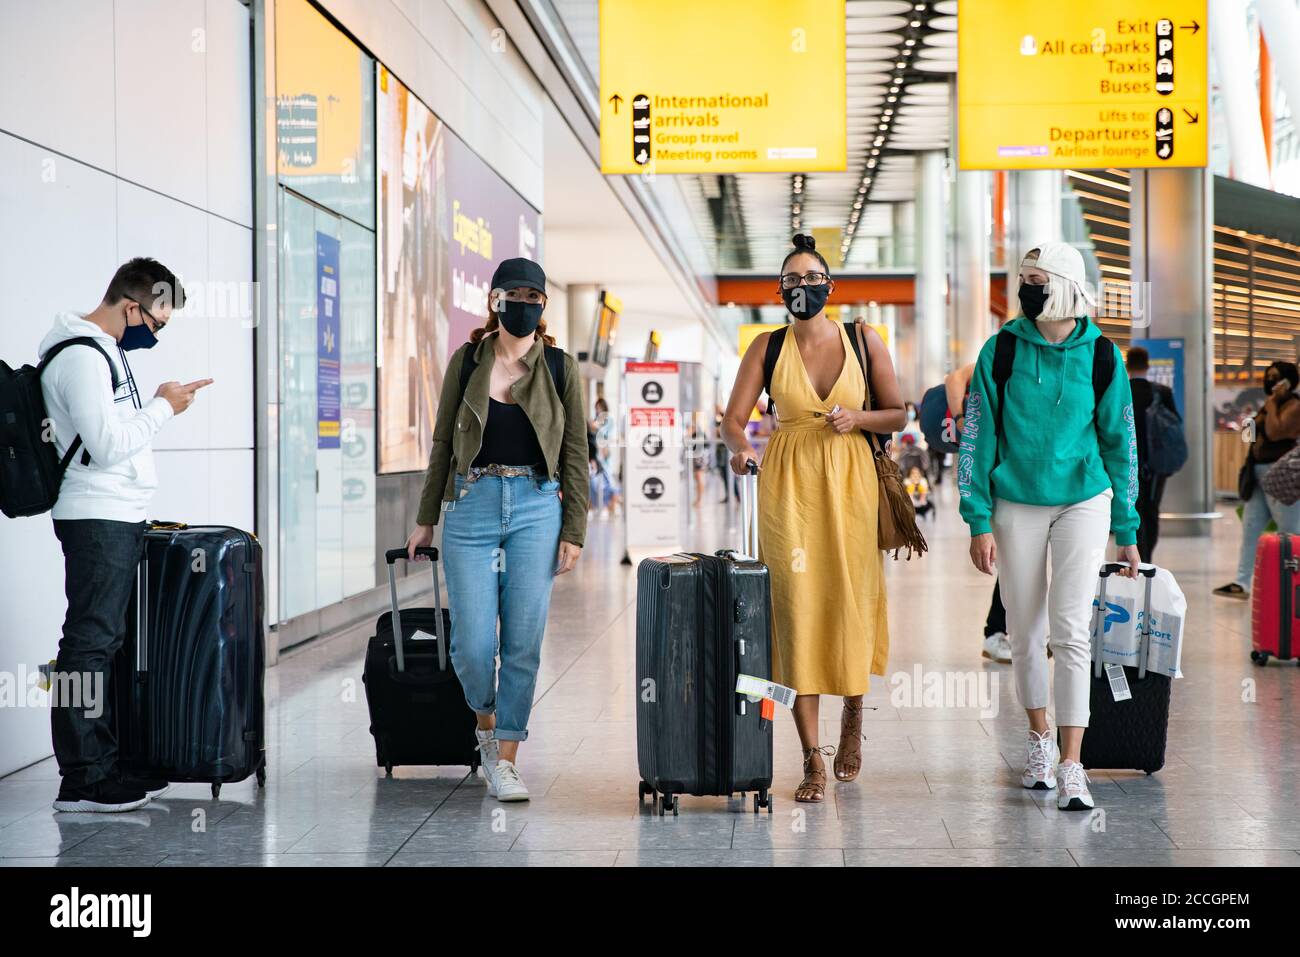 (left to right) Alex Parr, Carmen Jones and Neringa Juskauskaite who have arrived in from Pula, Croatia to London Heathrow Airport and now how to self isolate for 14 days. Stock Photo